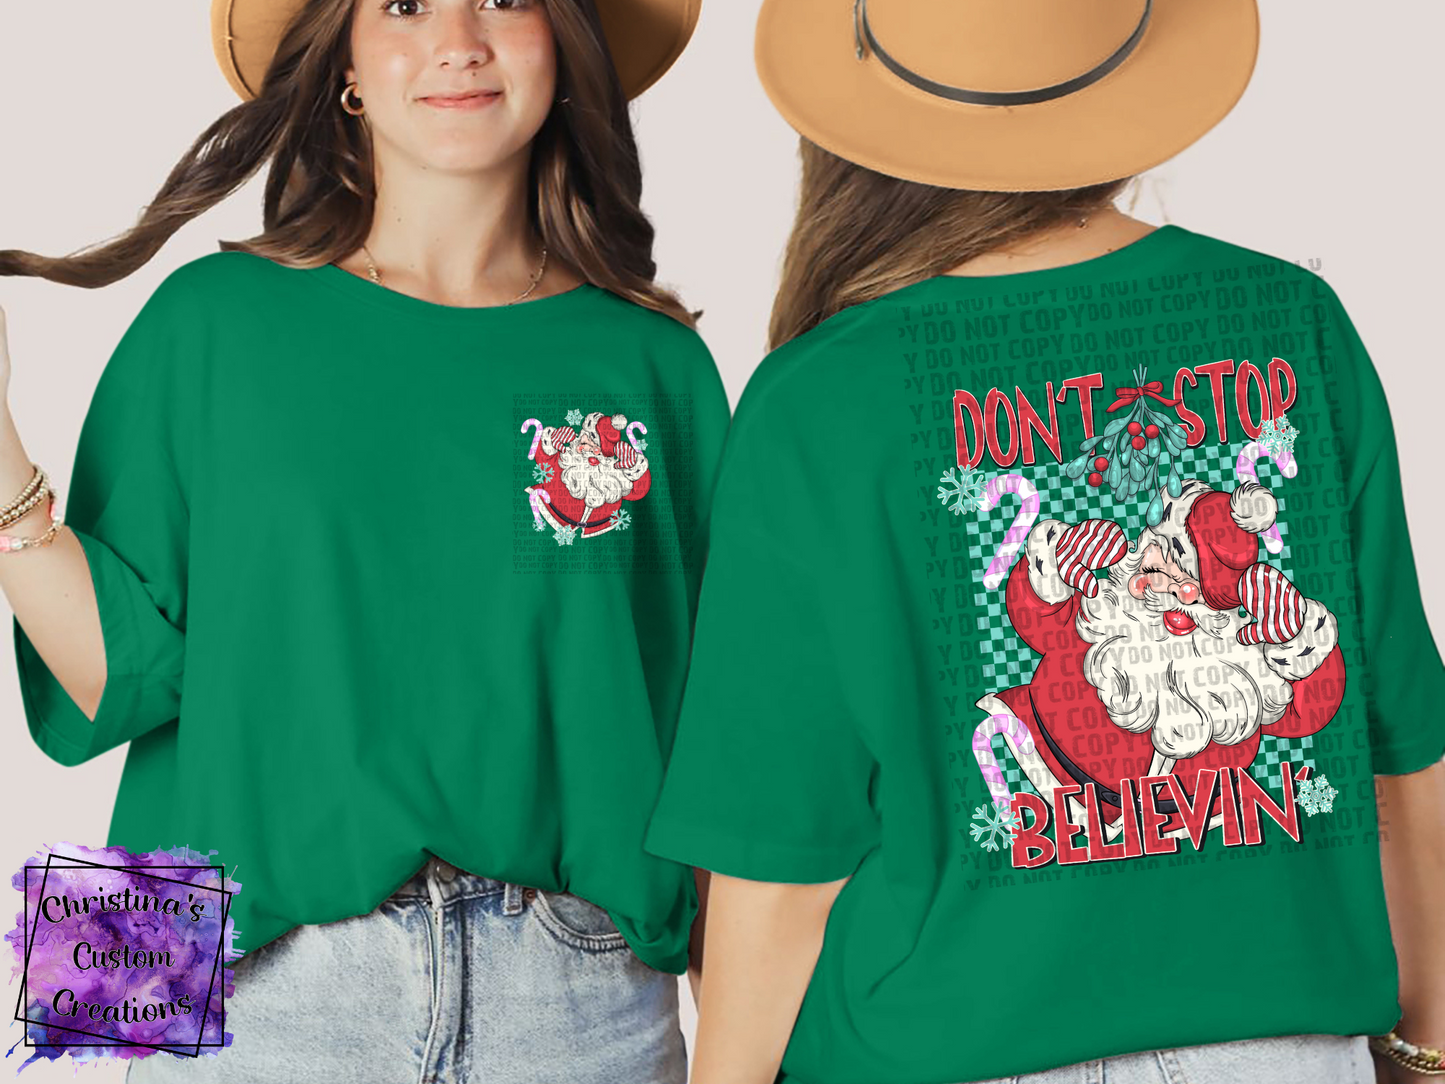 Don't Stop Believin' T-Shirt | Cute Christmas Shirt | Front and Back Shirt | Fast Shipping | Super Soft Shirts for Women/Kid's